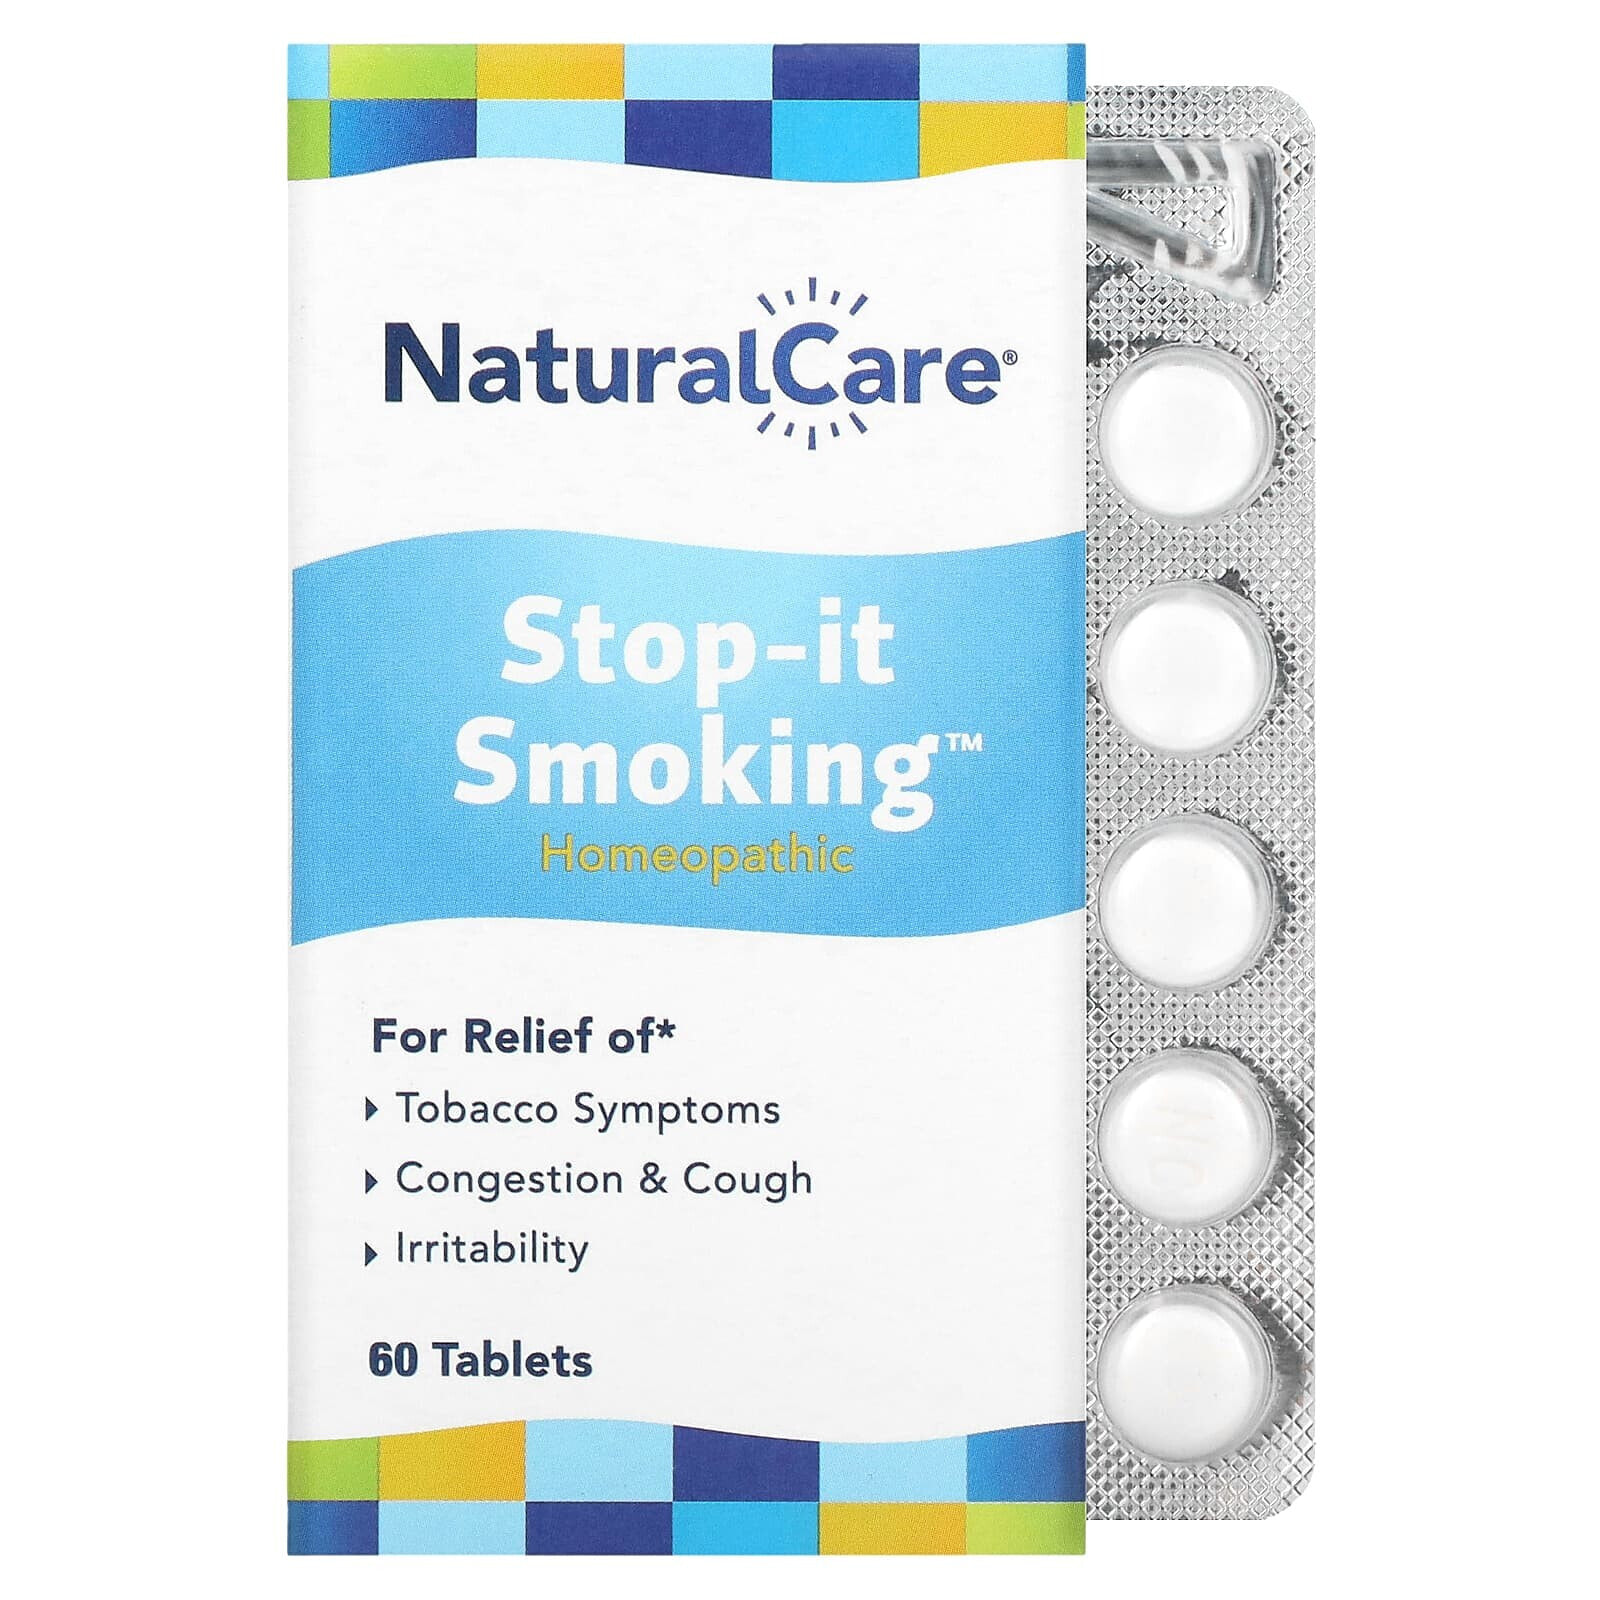 Stop-it Smoking, 60 Tablets